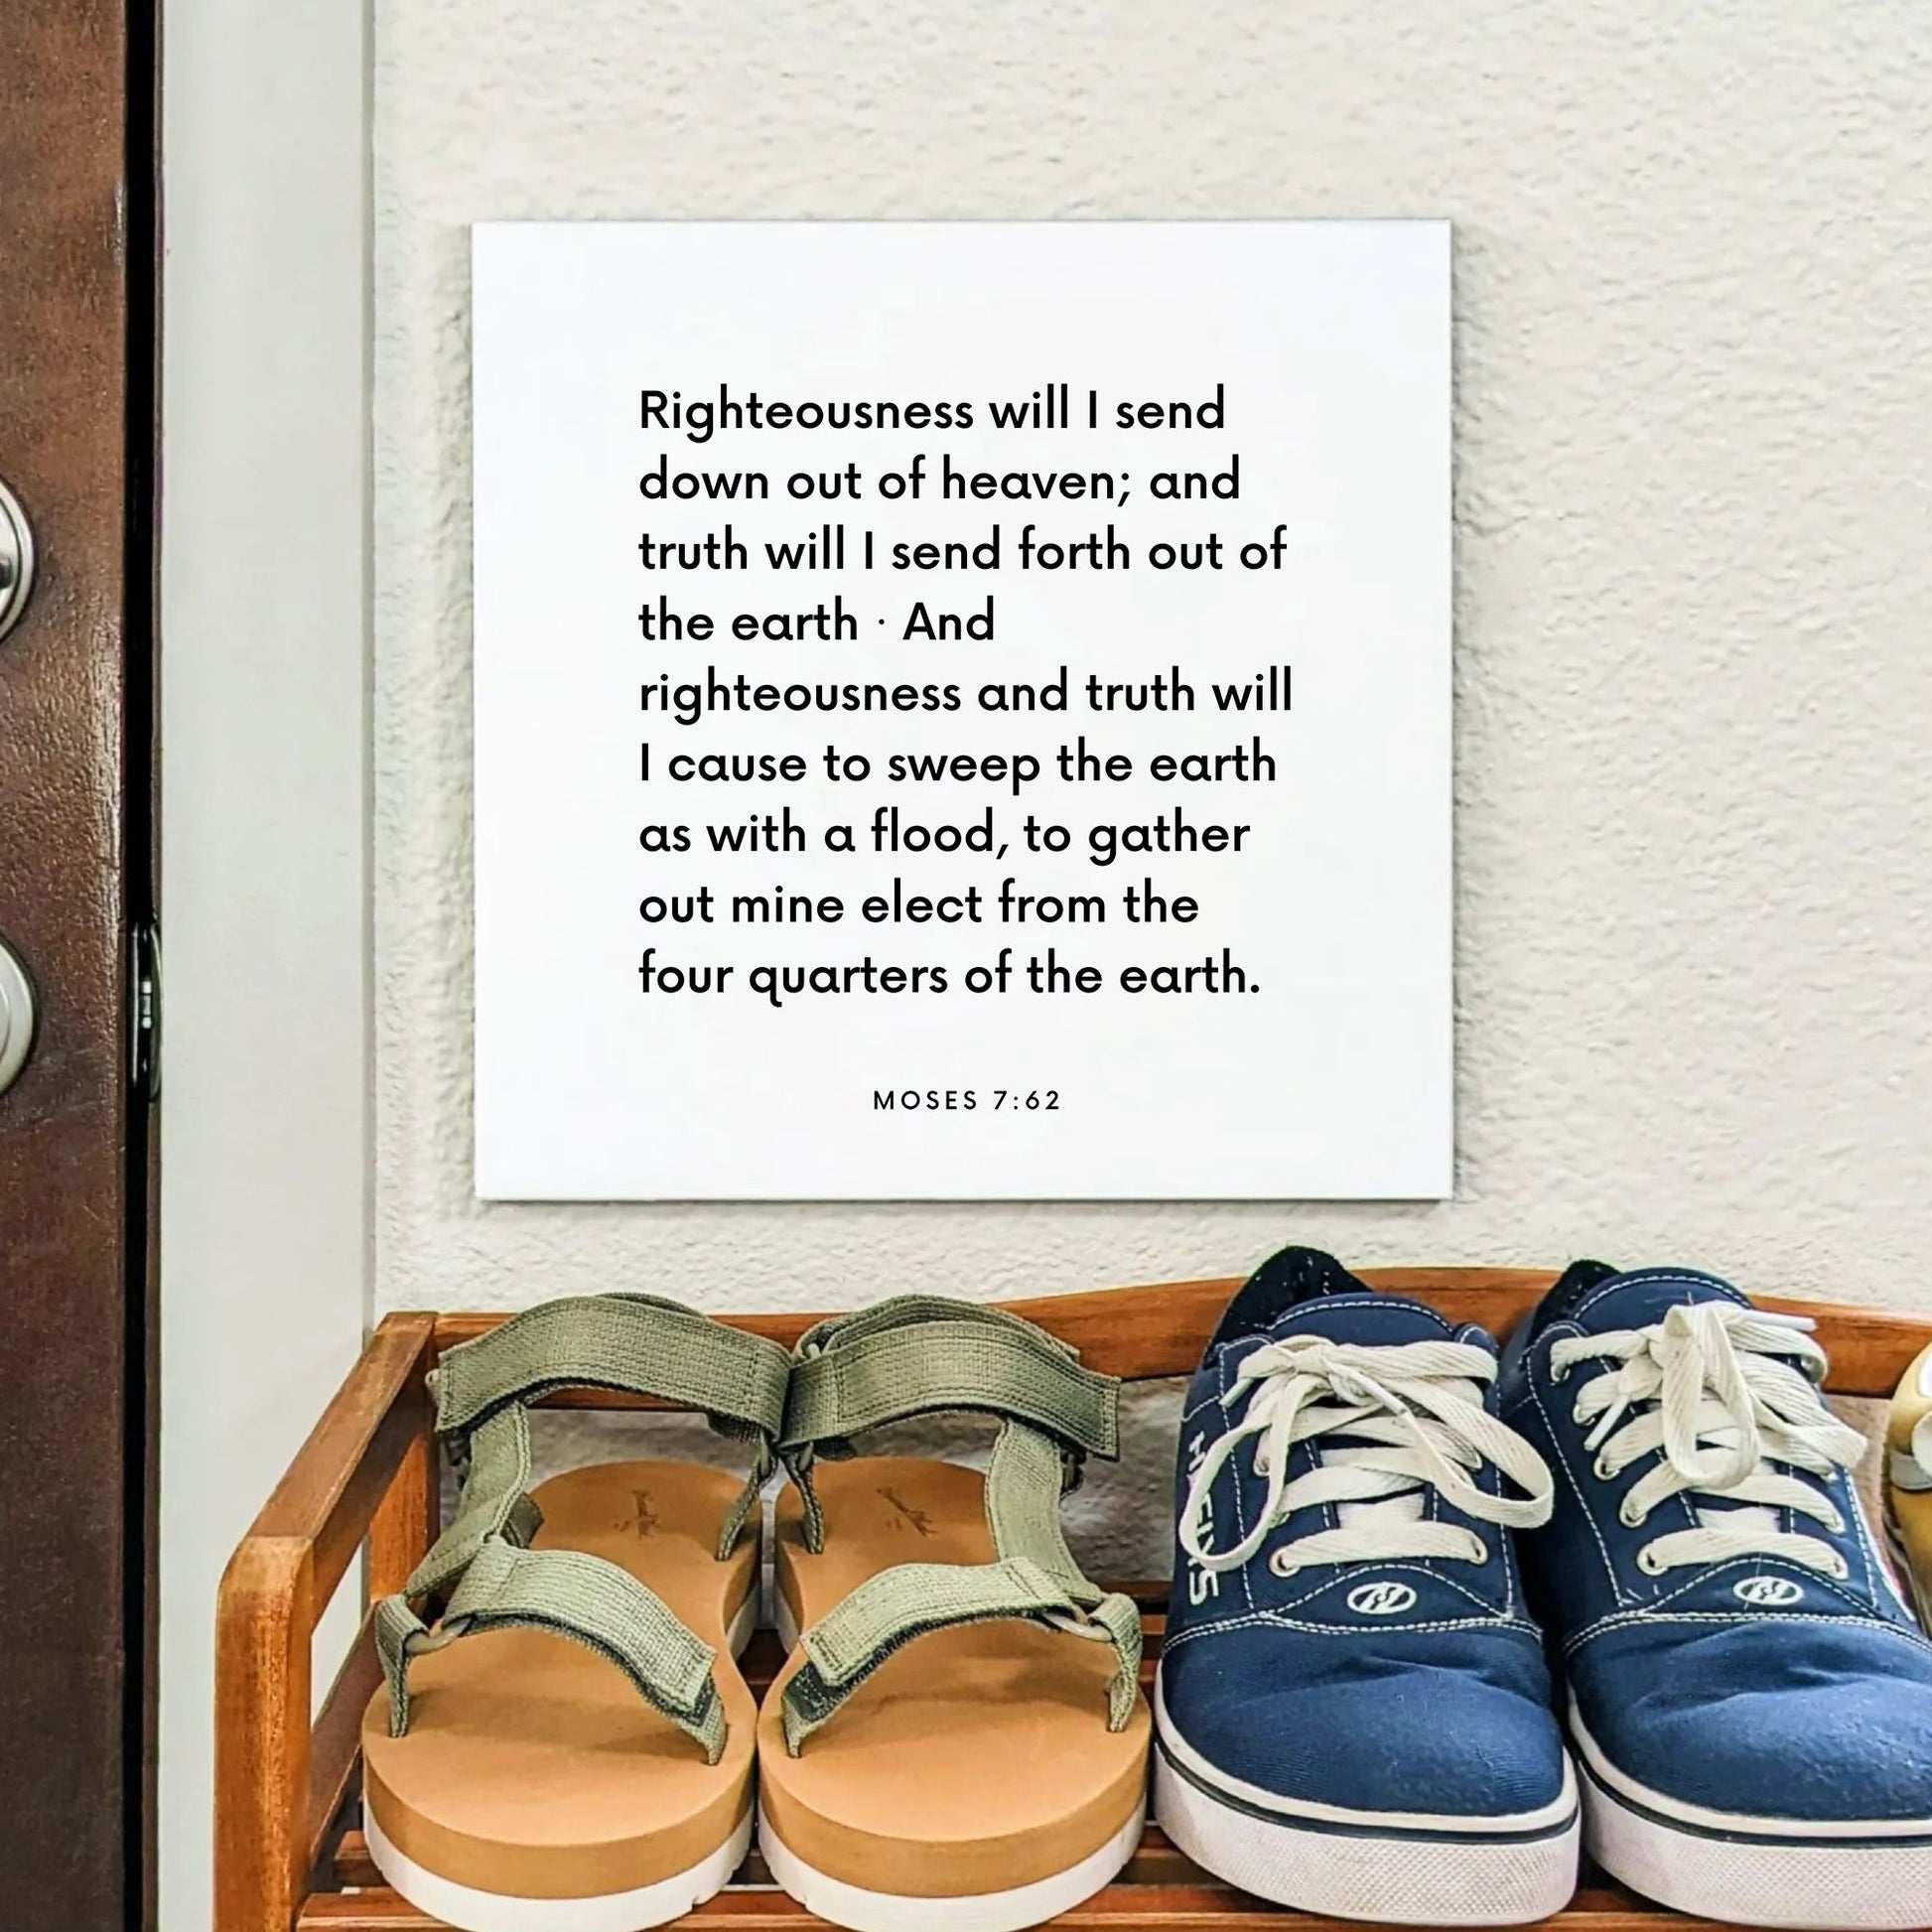 Shoes mouting of the scripture tile for Moses 7:62 - "Righteousness will I send down out of heaven"